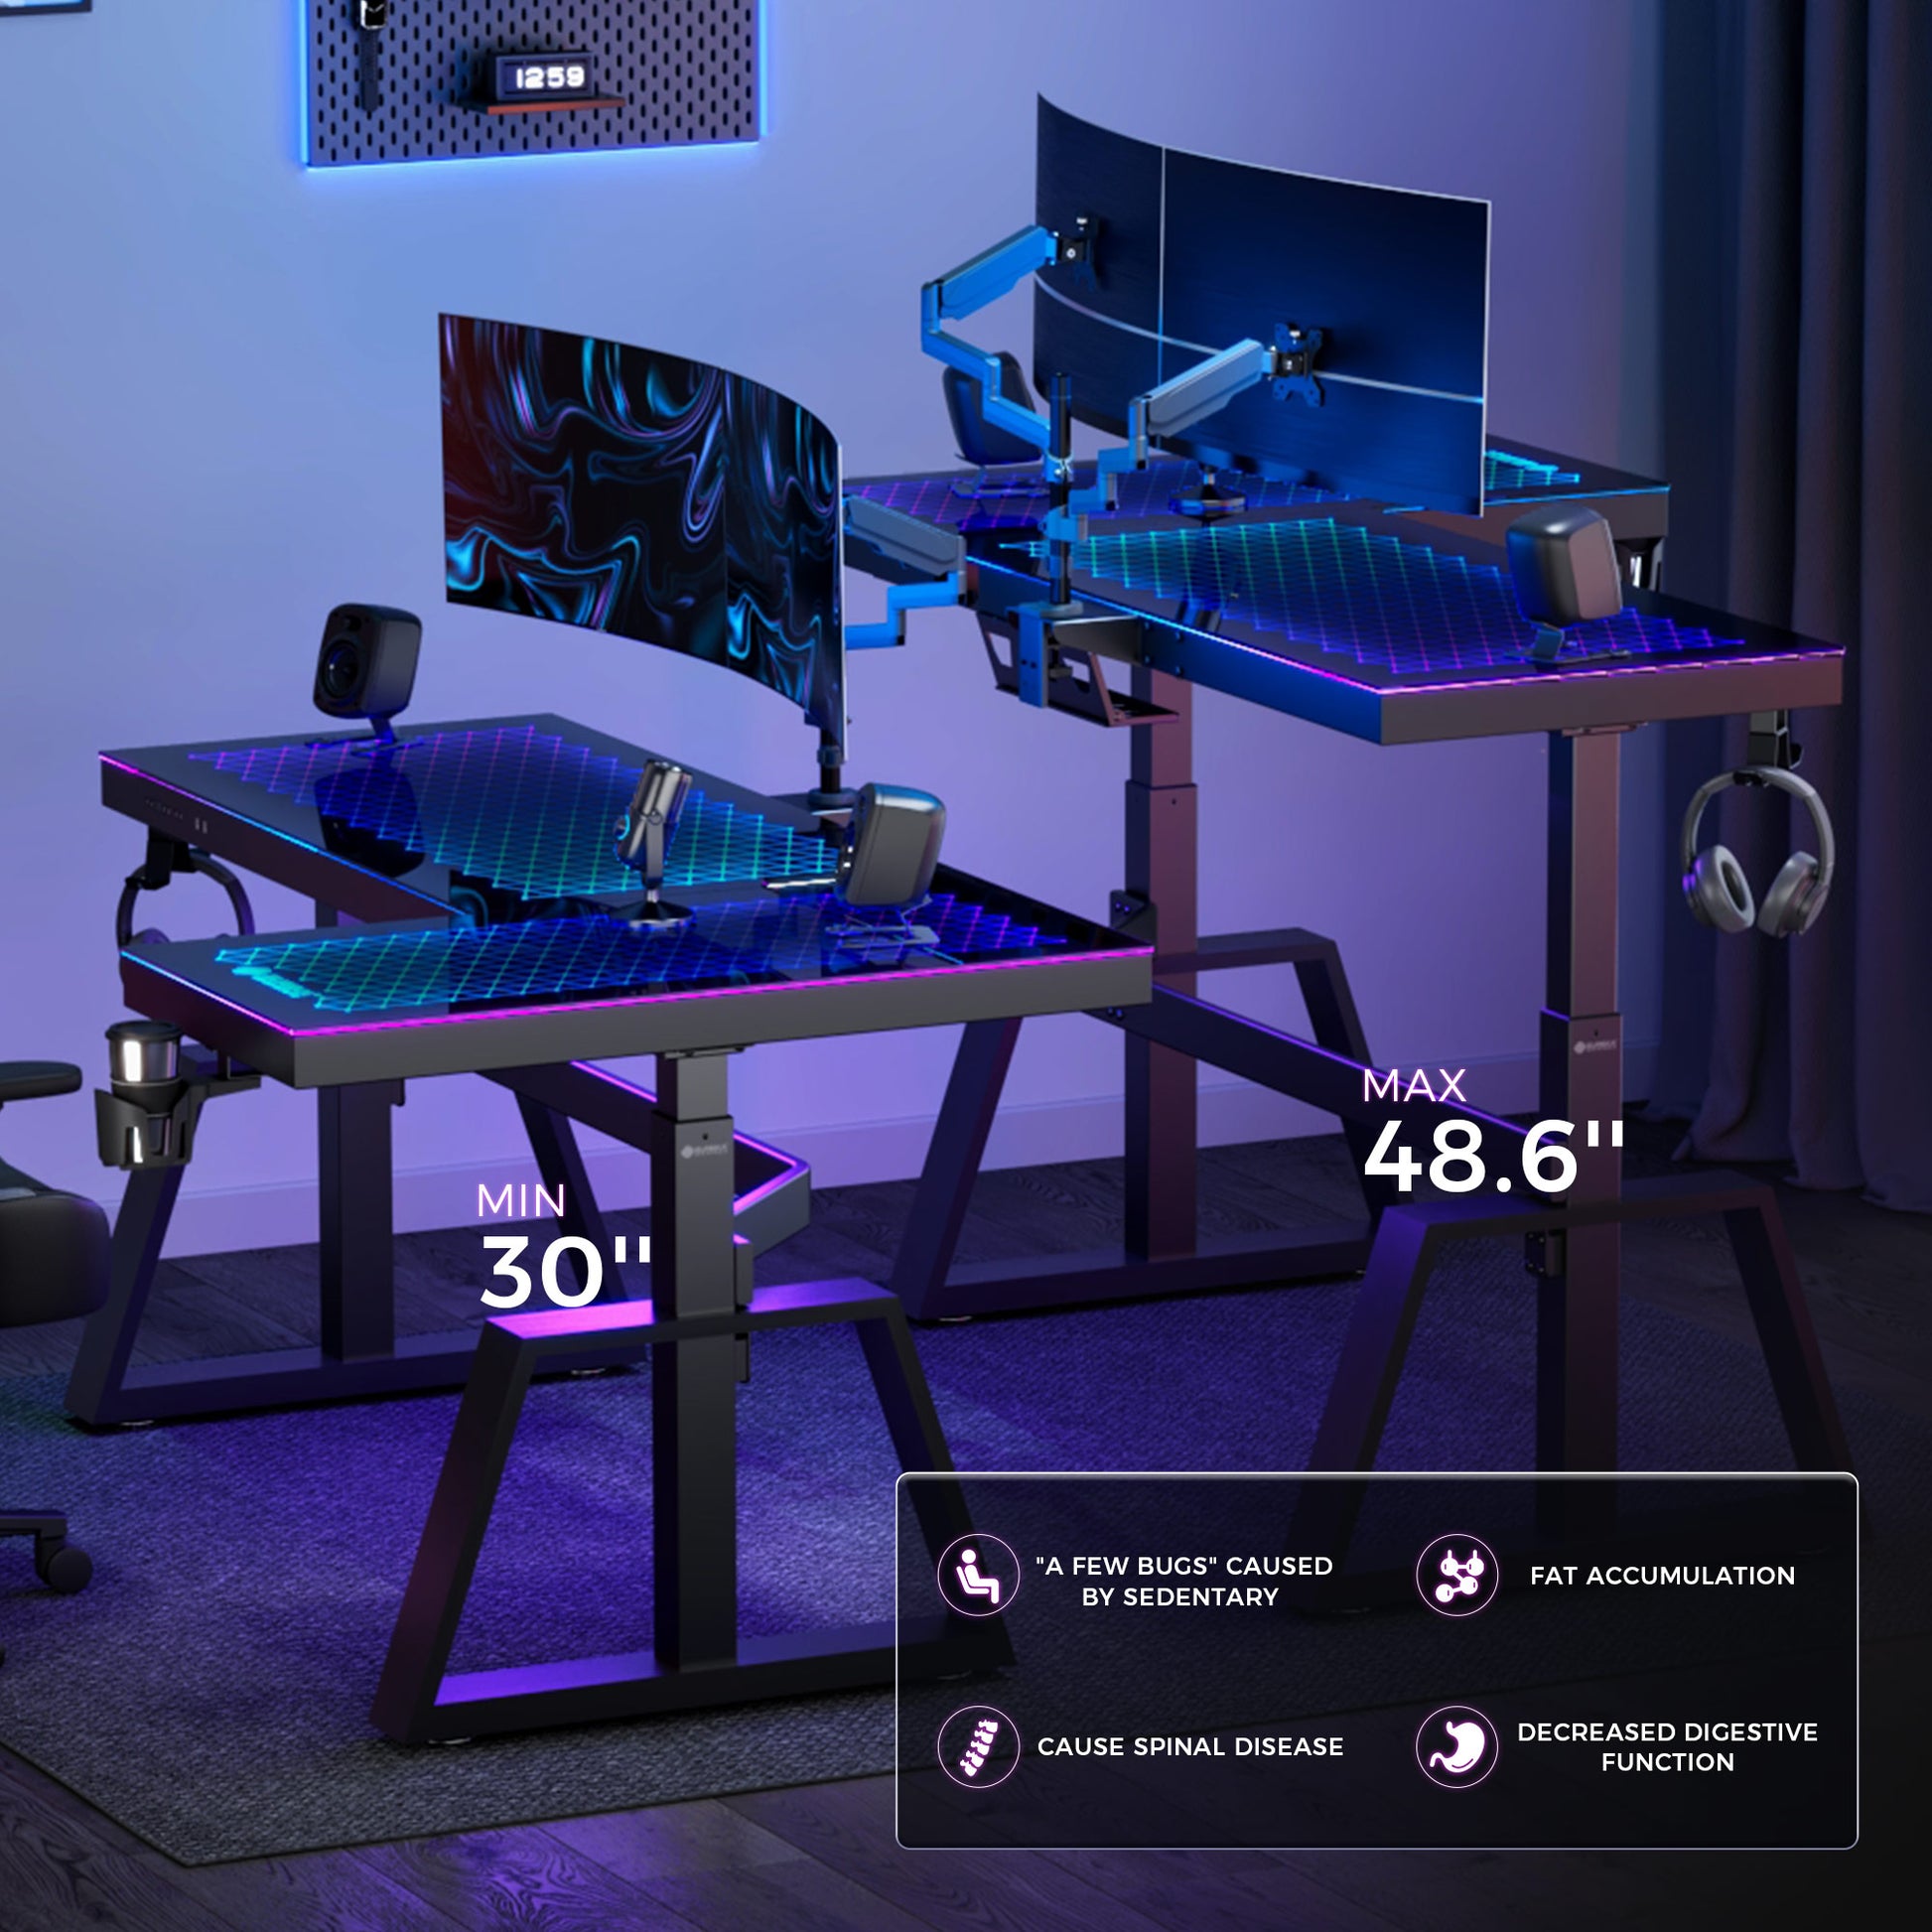 GTG-L60 PRO, L-Shaped Glass Desktop Gaming Standing Desk, Black-colored, Left Sided, RGB Light Up Gaming Desk, Glass Top, Hight Adjustment from 30 inches to 48.6 inches